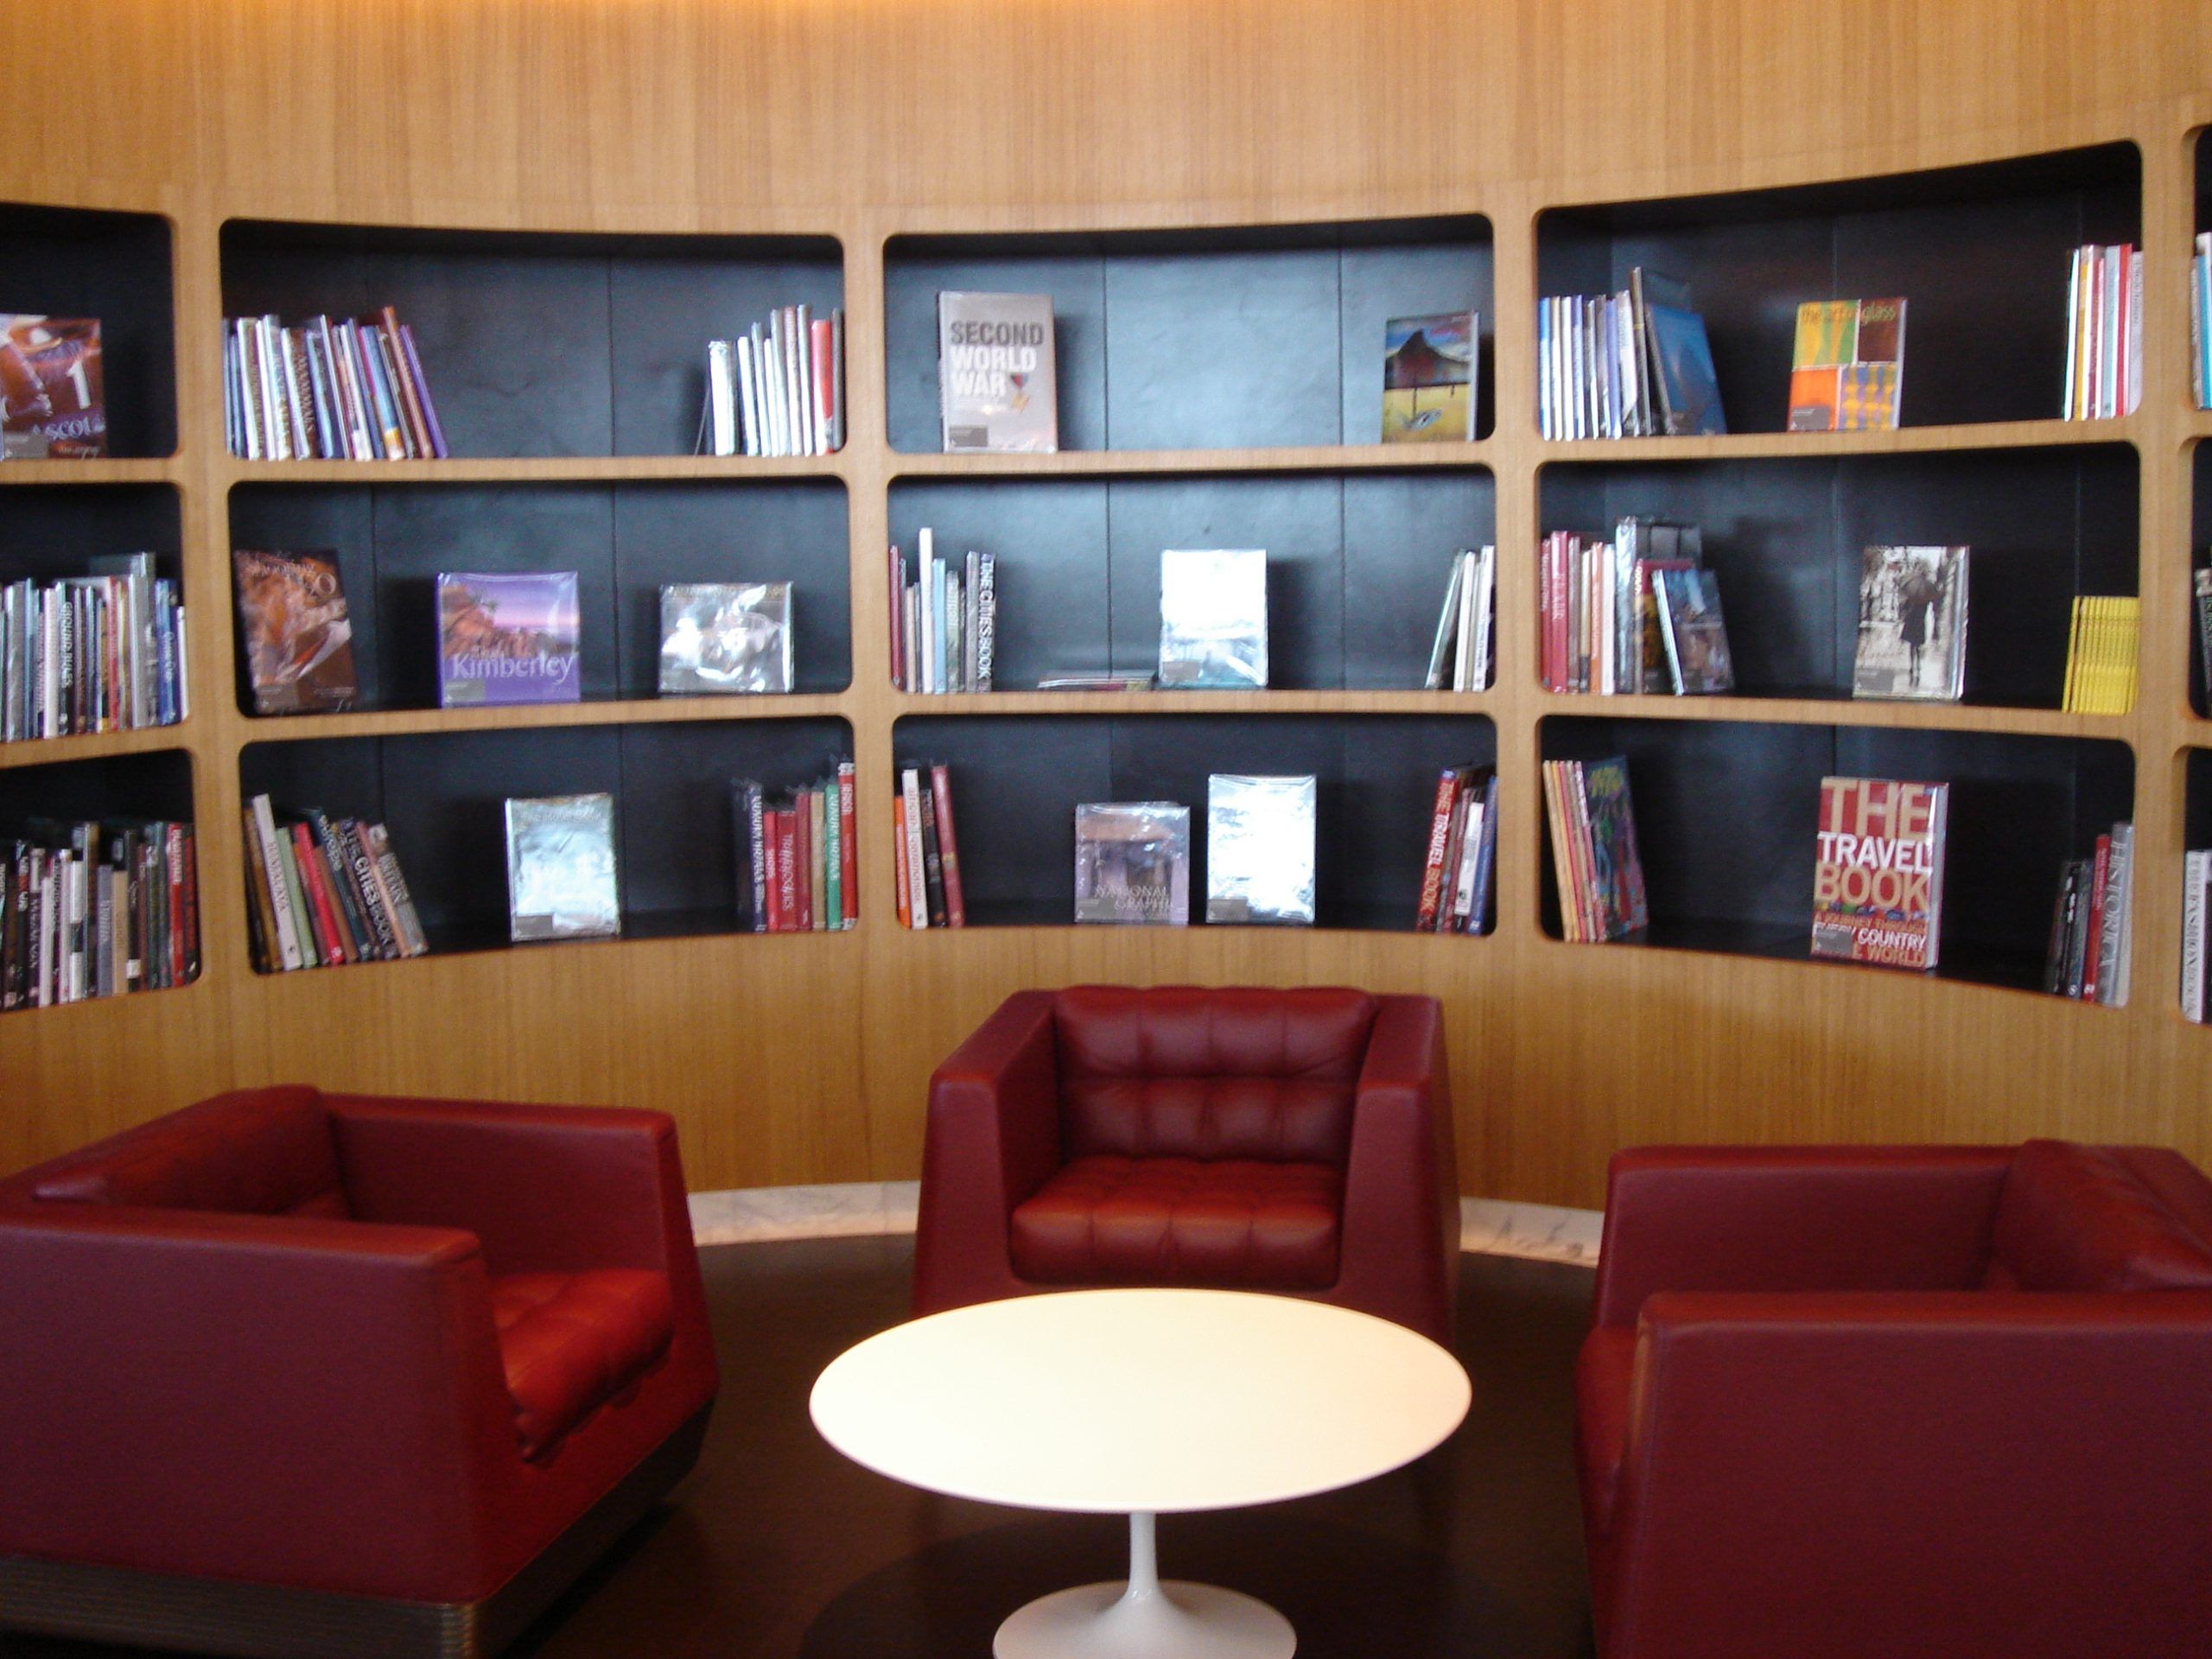 A round modernist table from the 1960s surrounded by couches; on the wall behind it are bookshelves with some books on display.